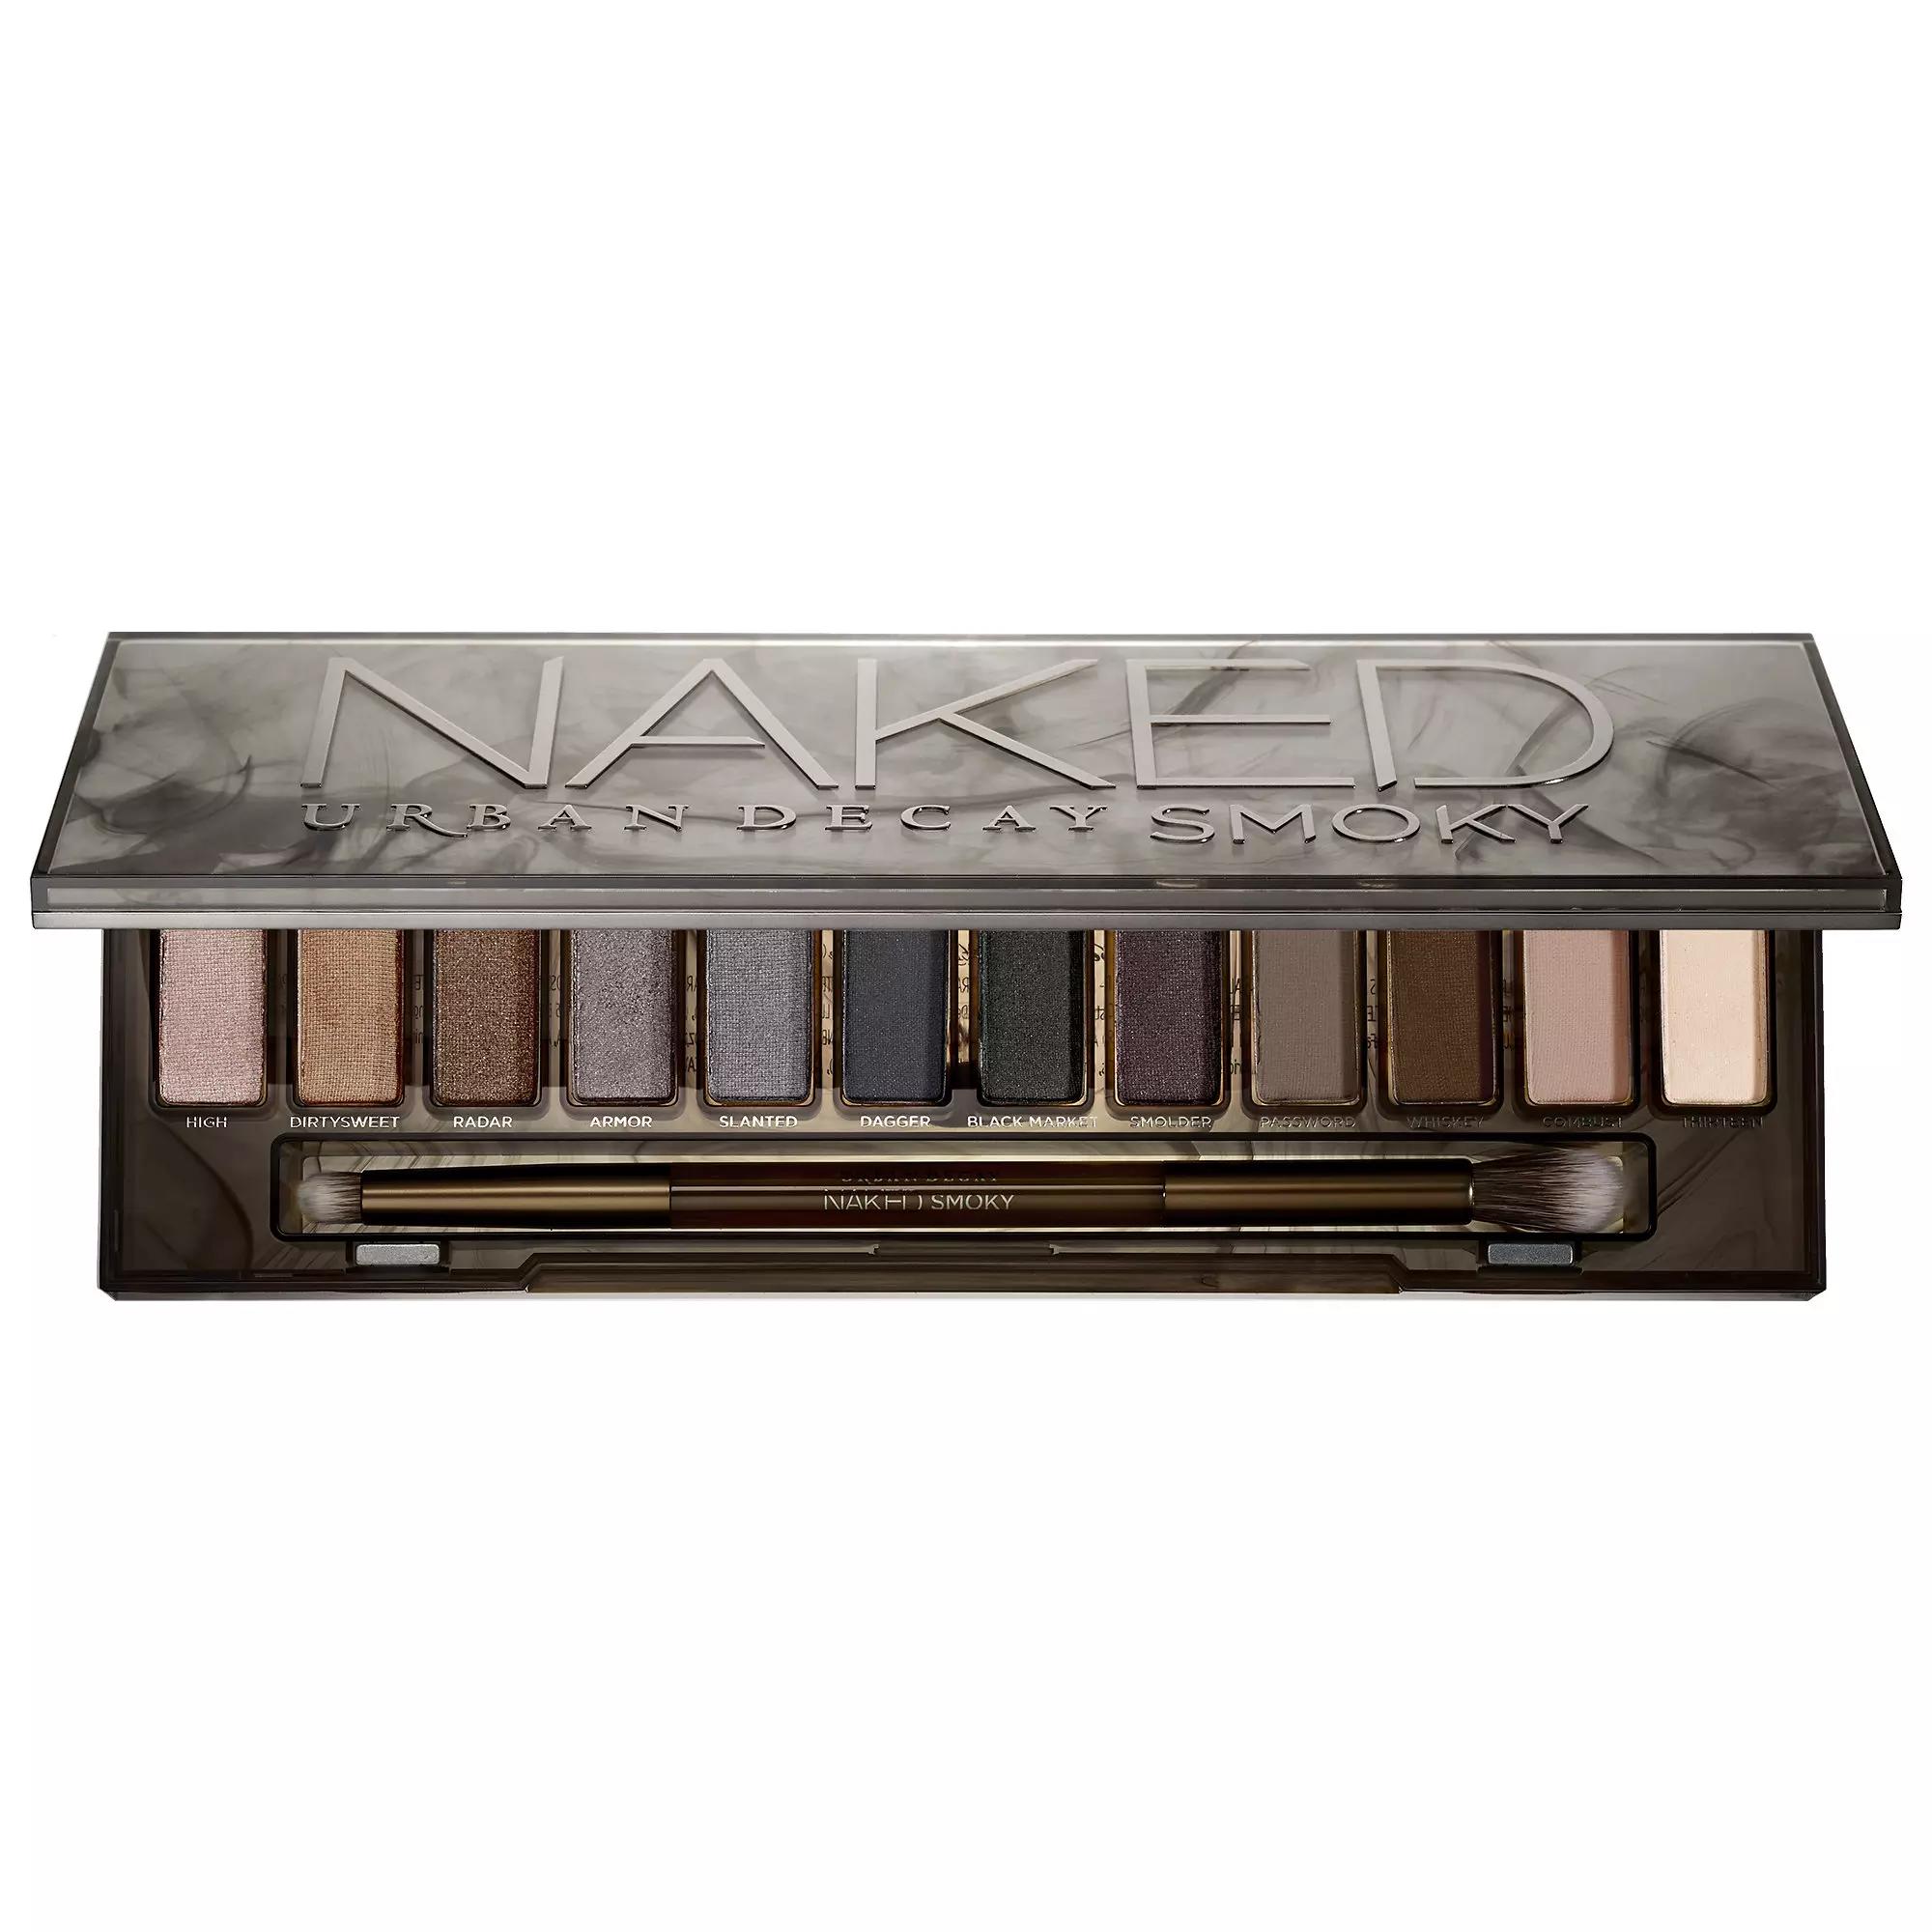 2nd Chance Urban Decay Naked Smoky Palette